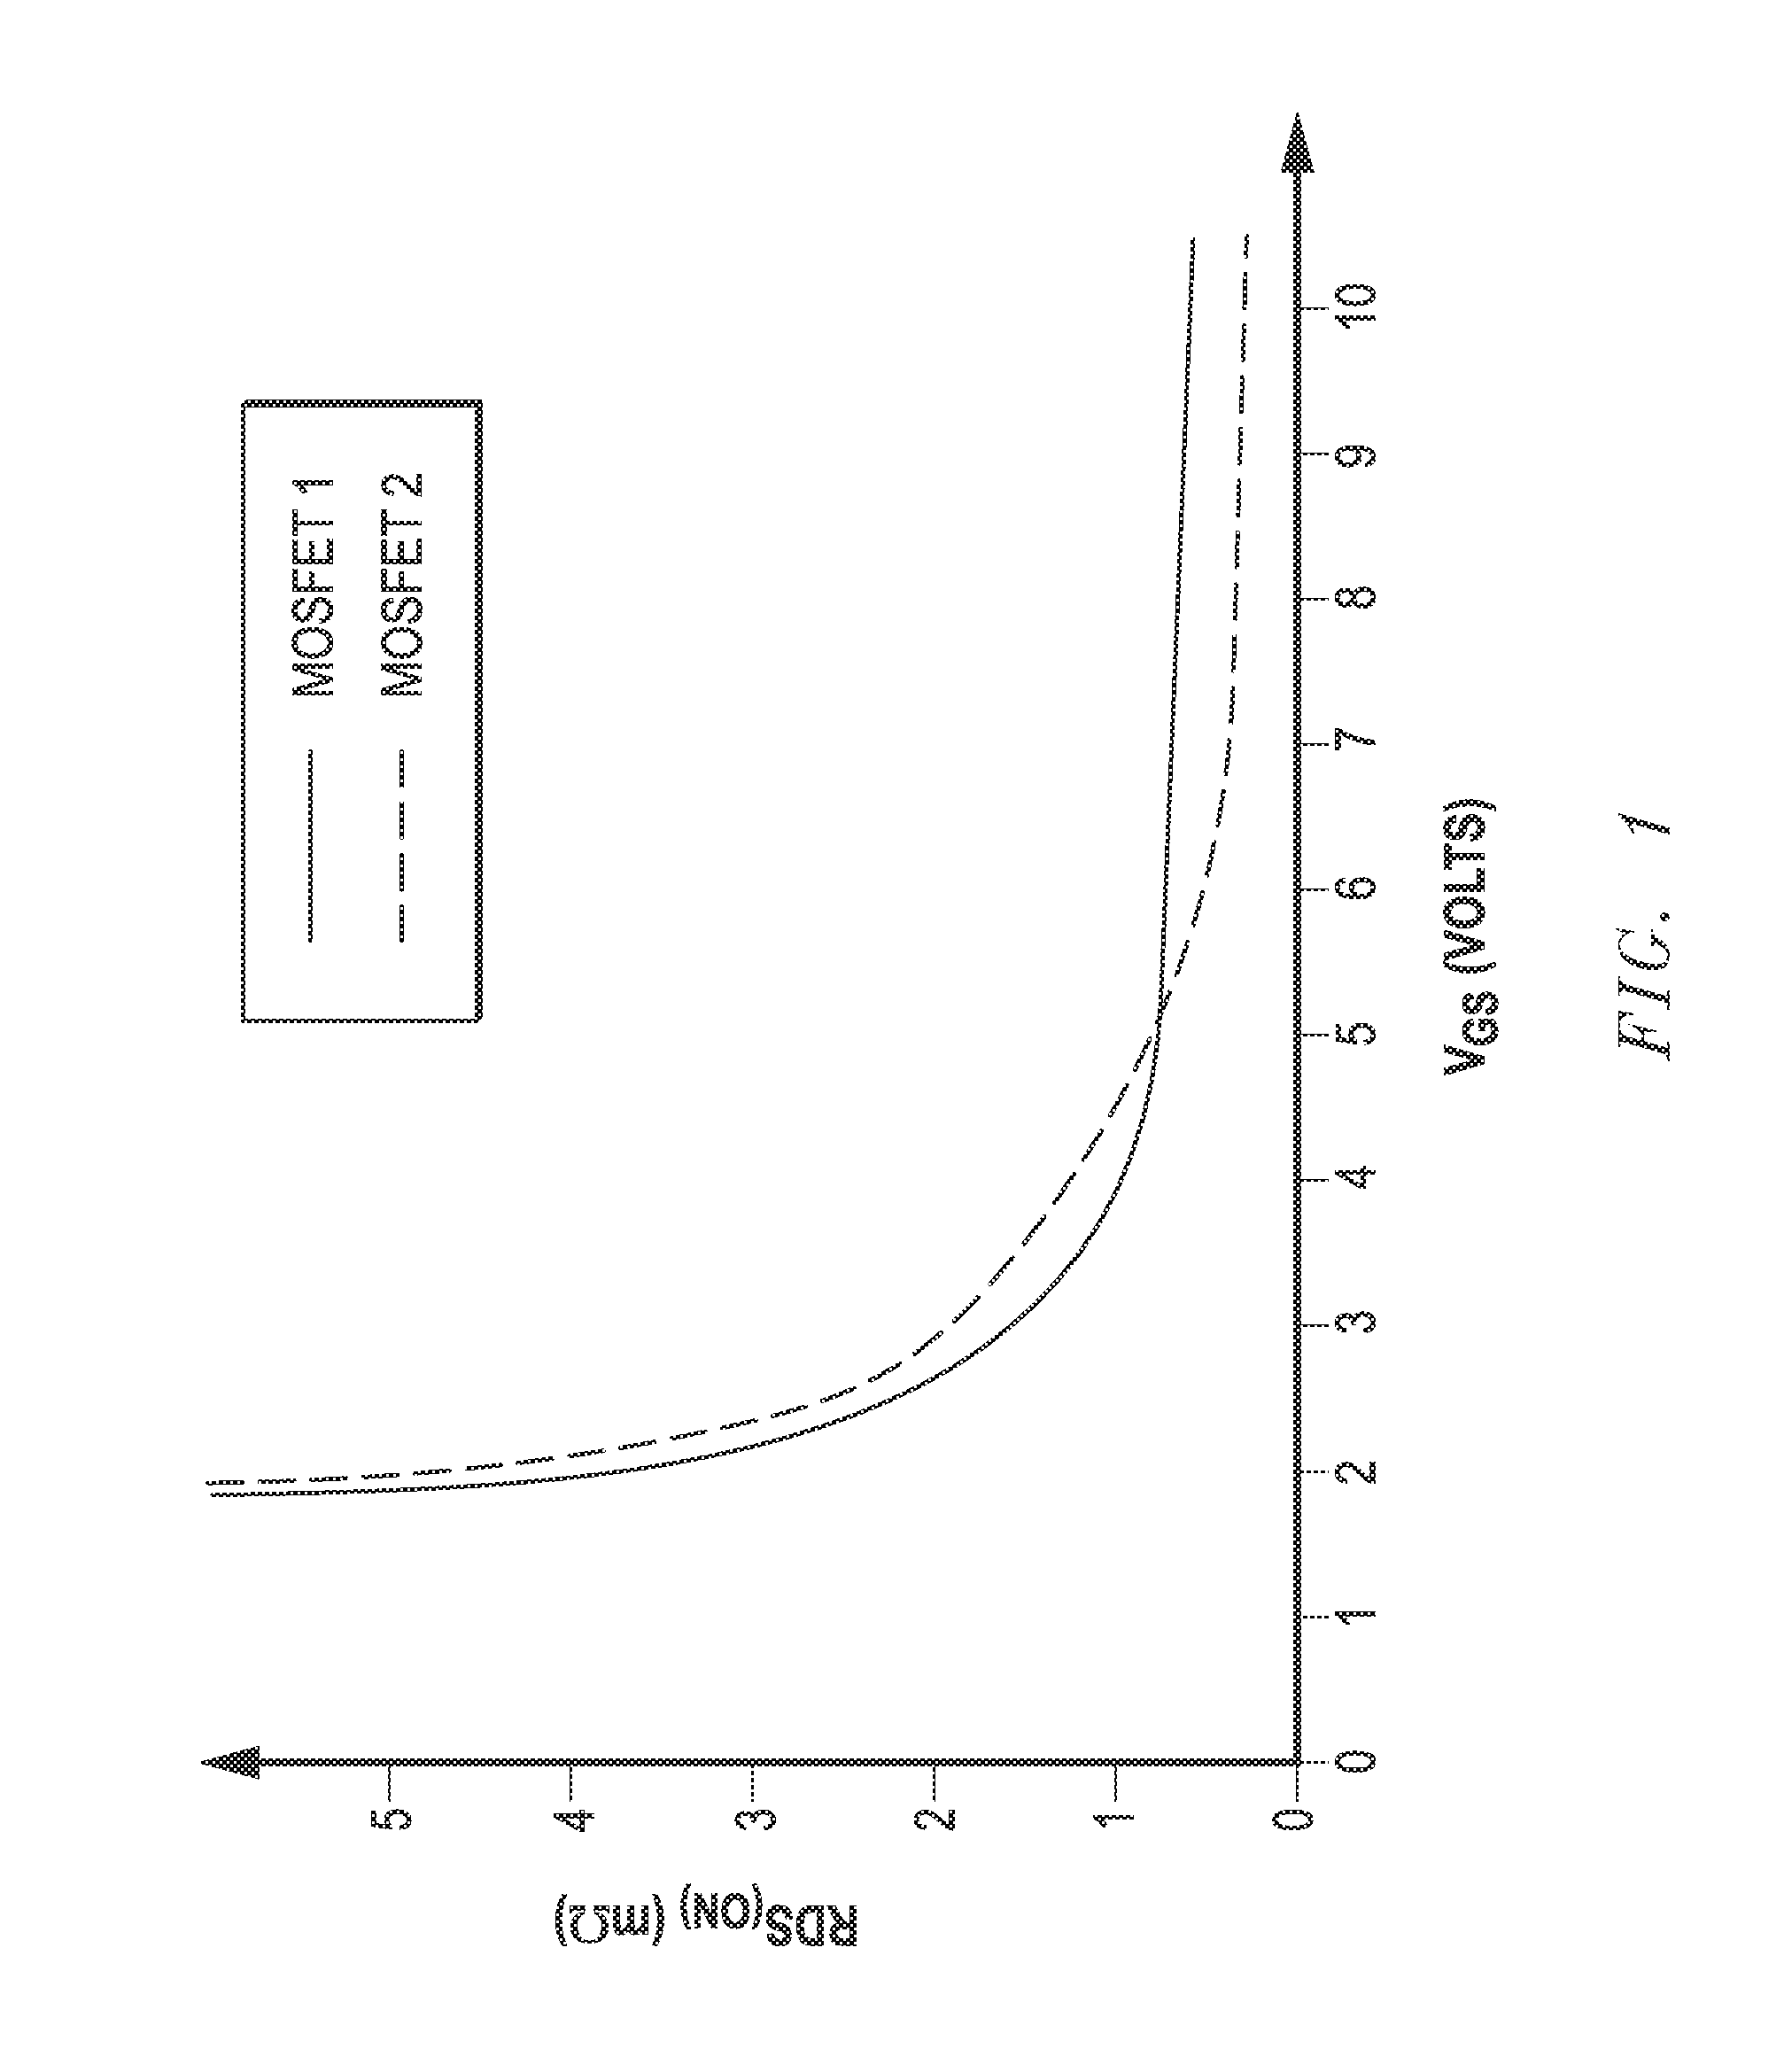 Methods and systems for implementing adaptive fet drive voltage optimization for power stages of multi-phase voltage regulator circuits